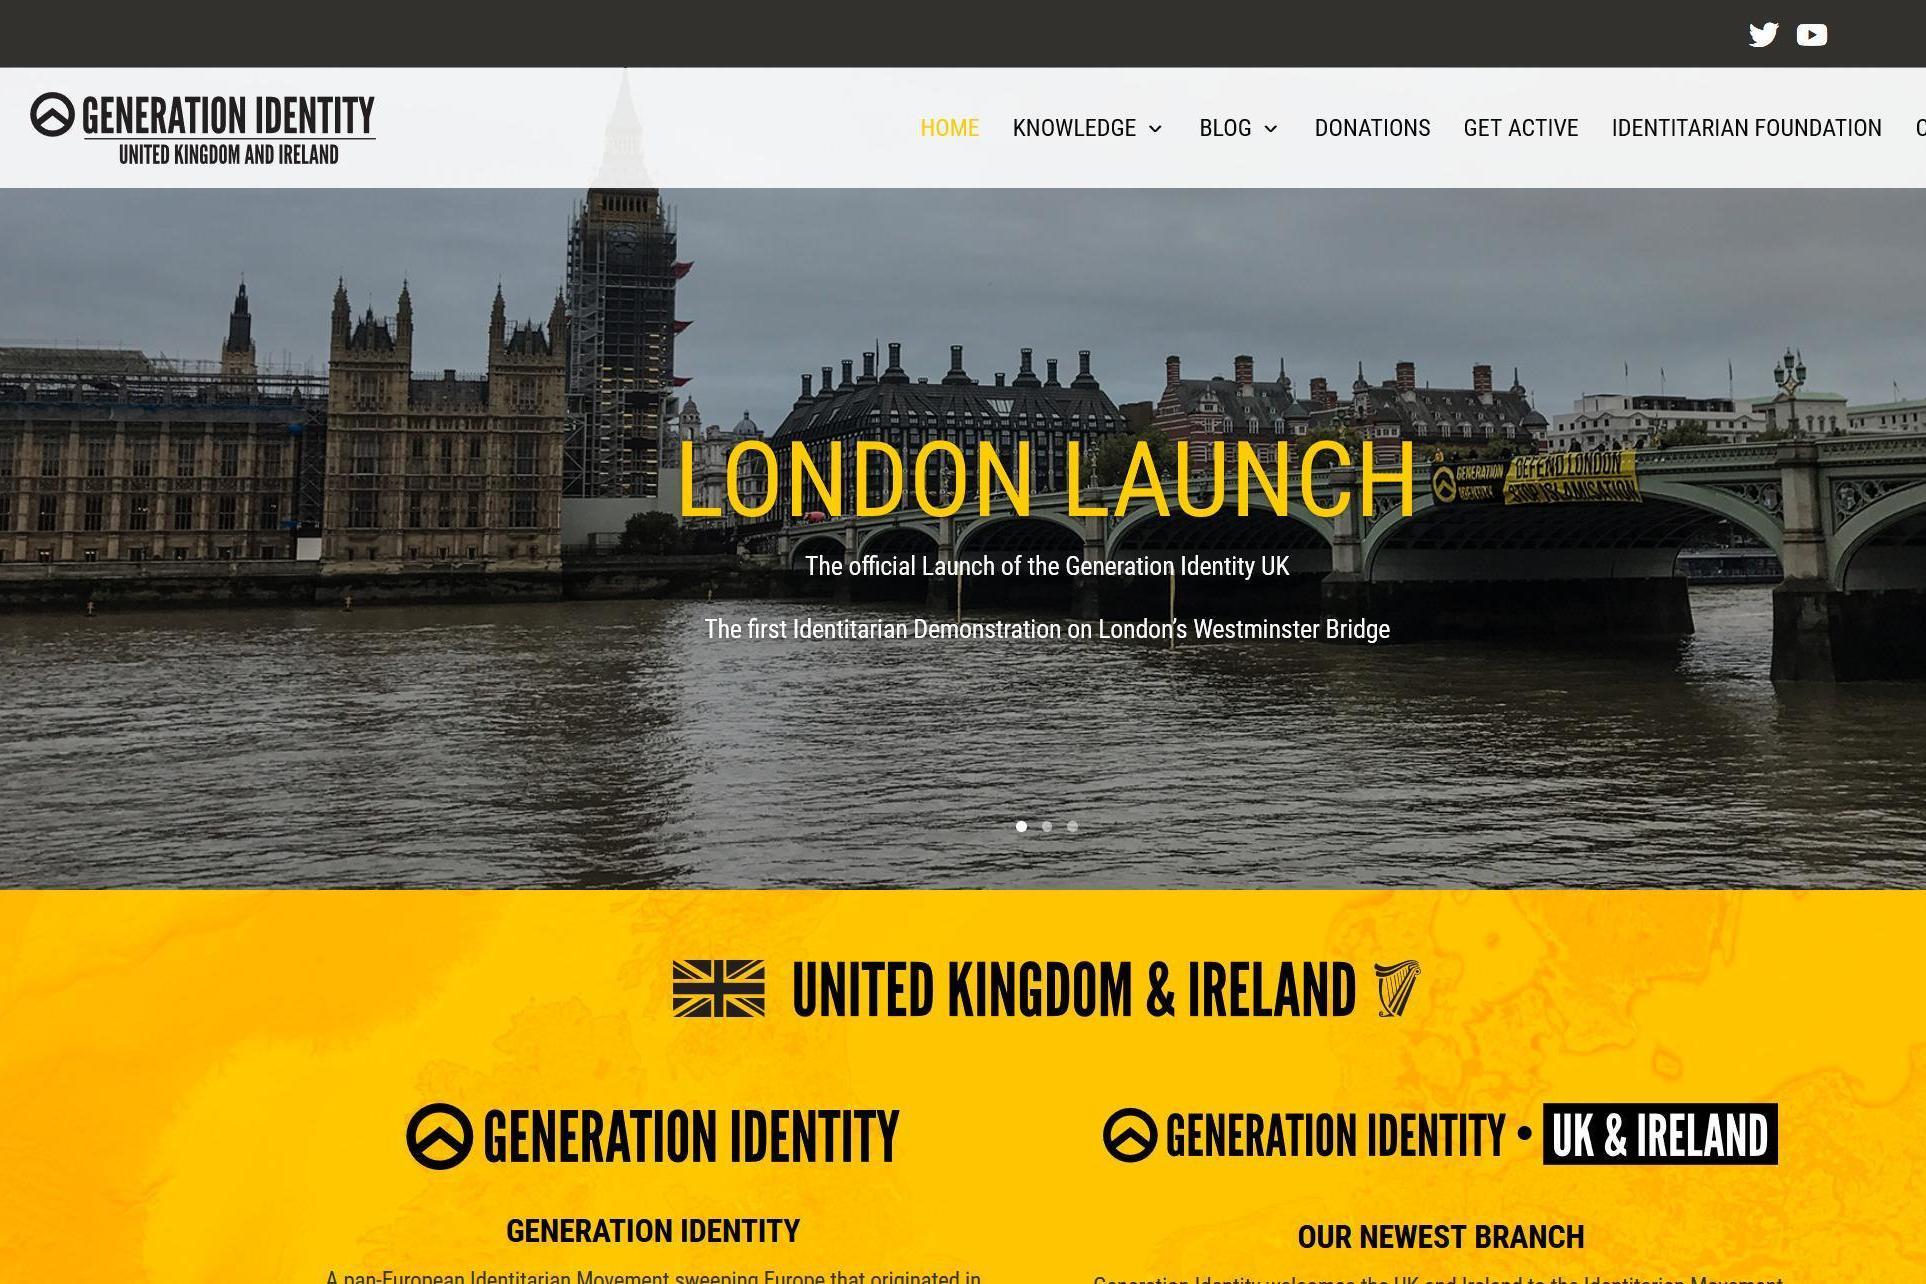 Generation Identity UK’s official website remains online